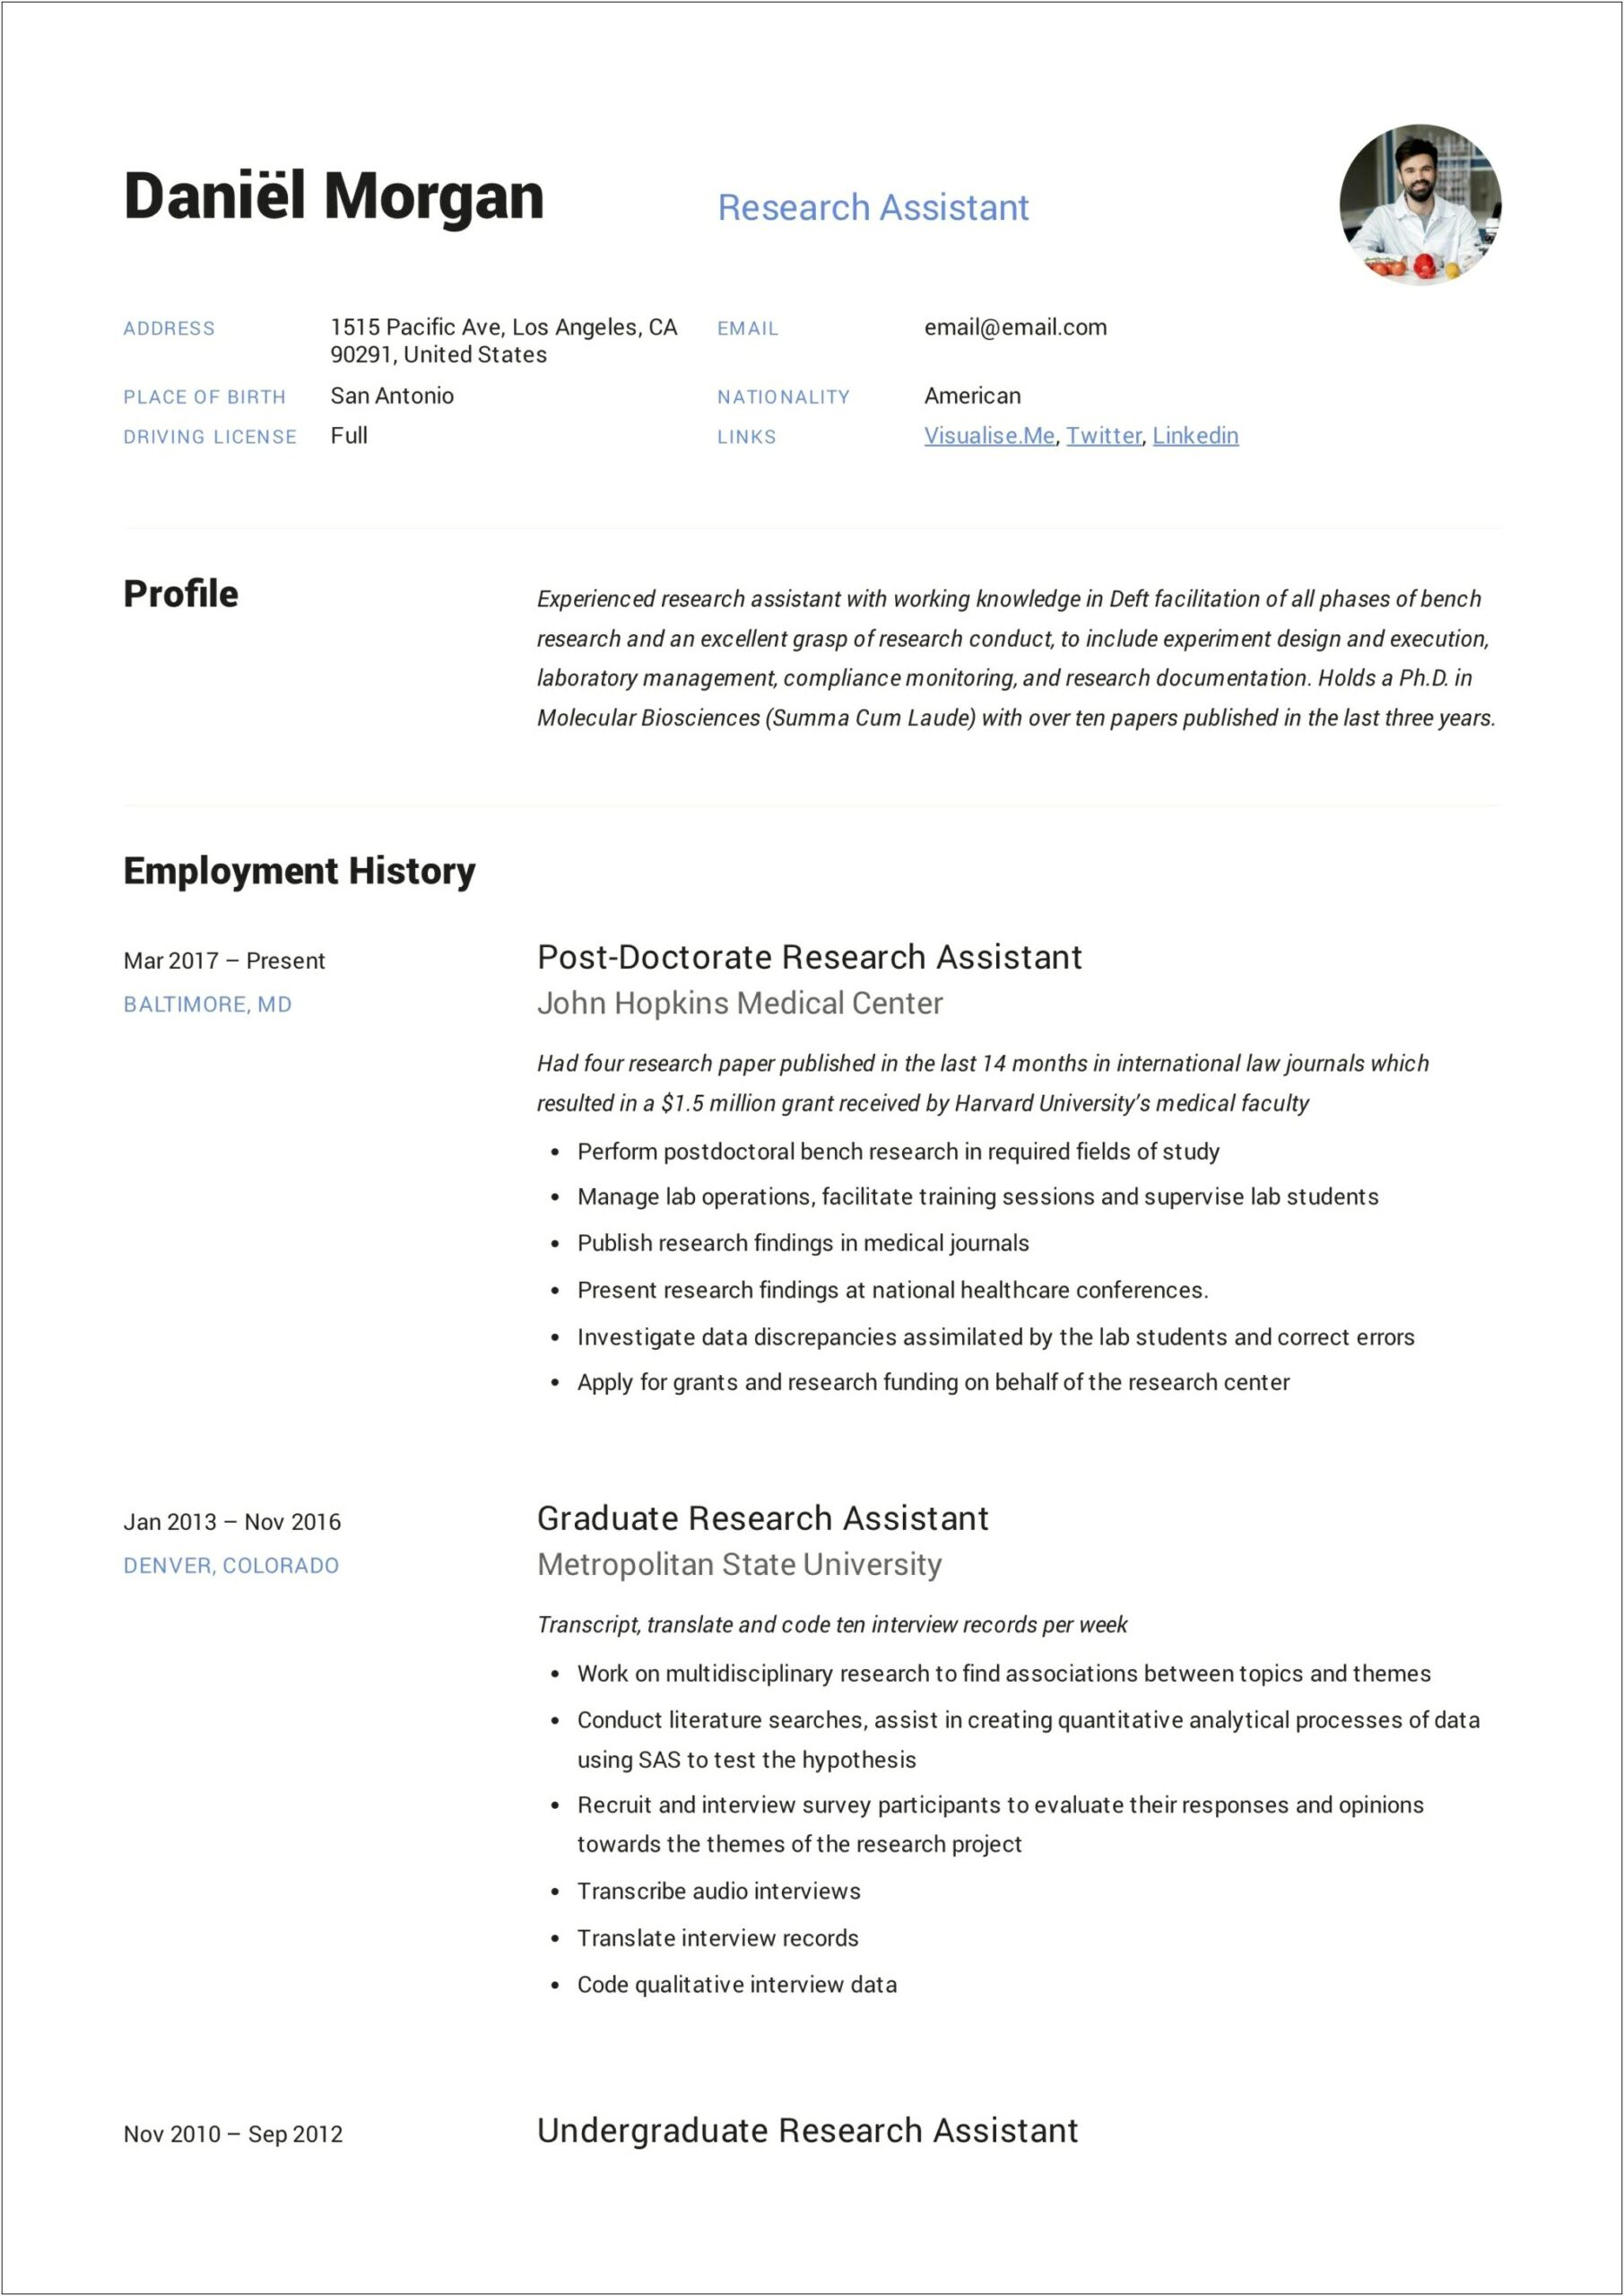 Including Research Experience On A Resume